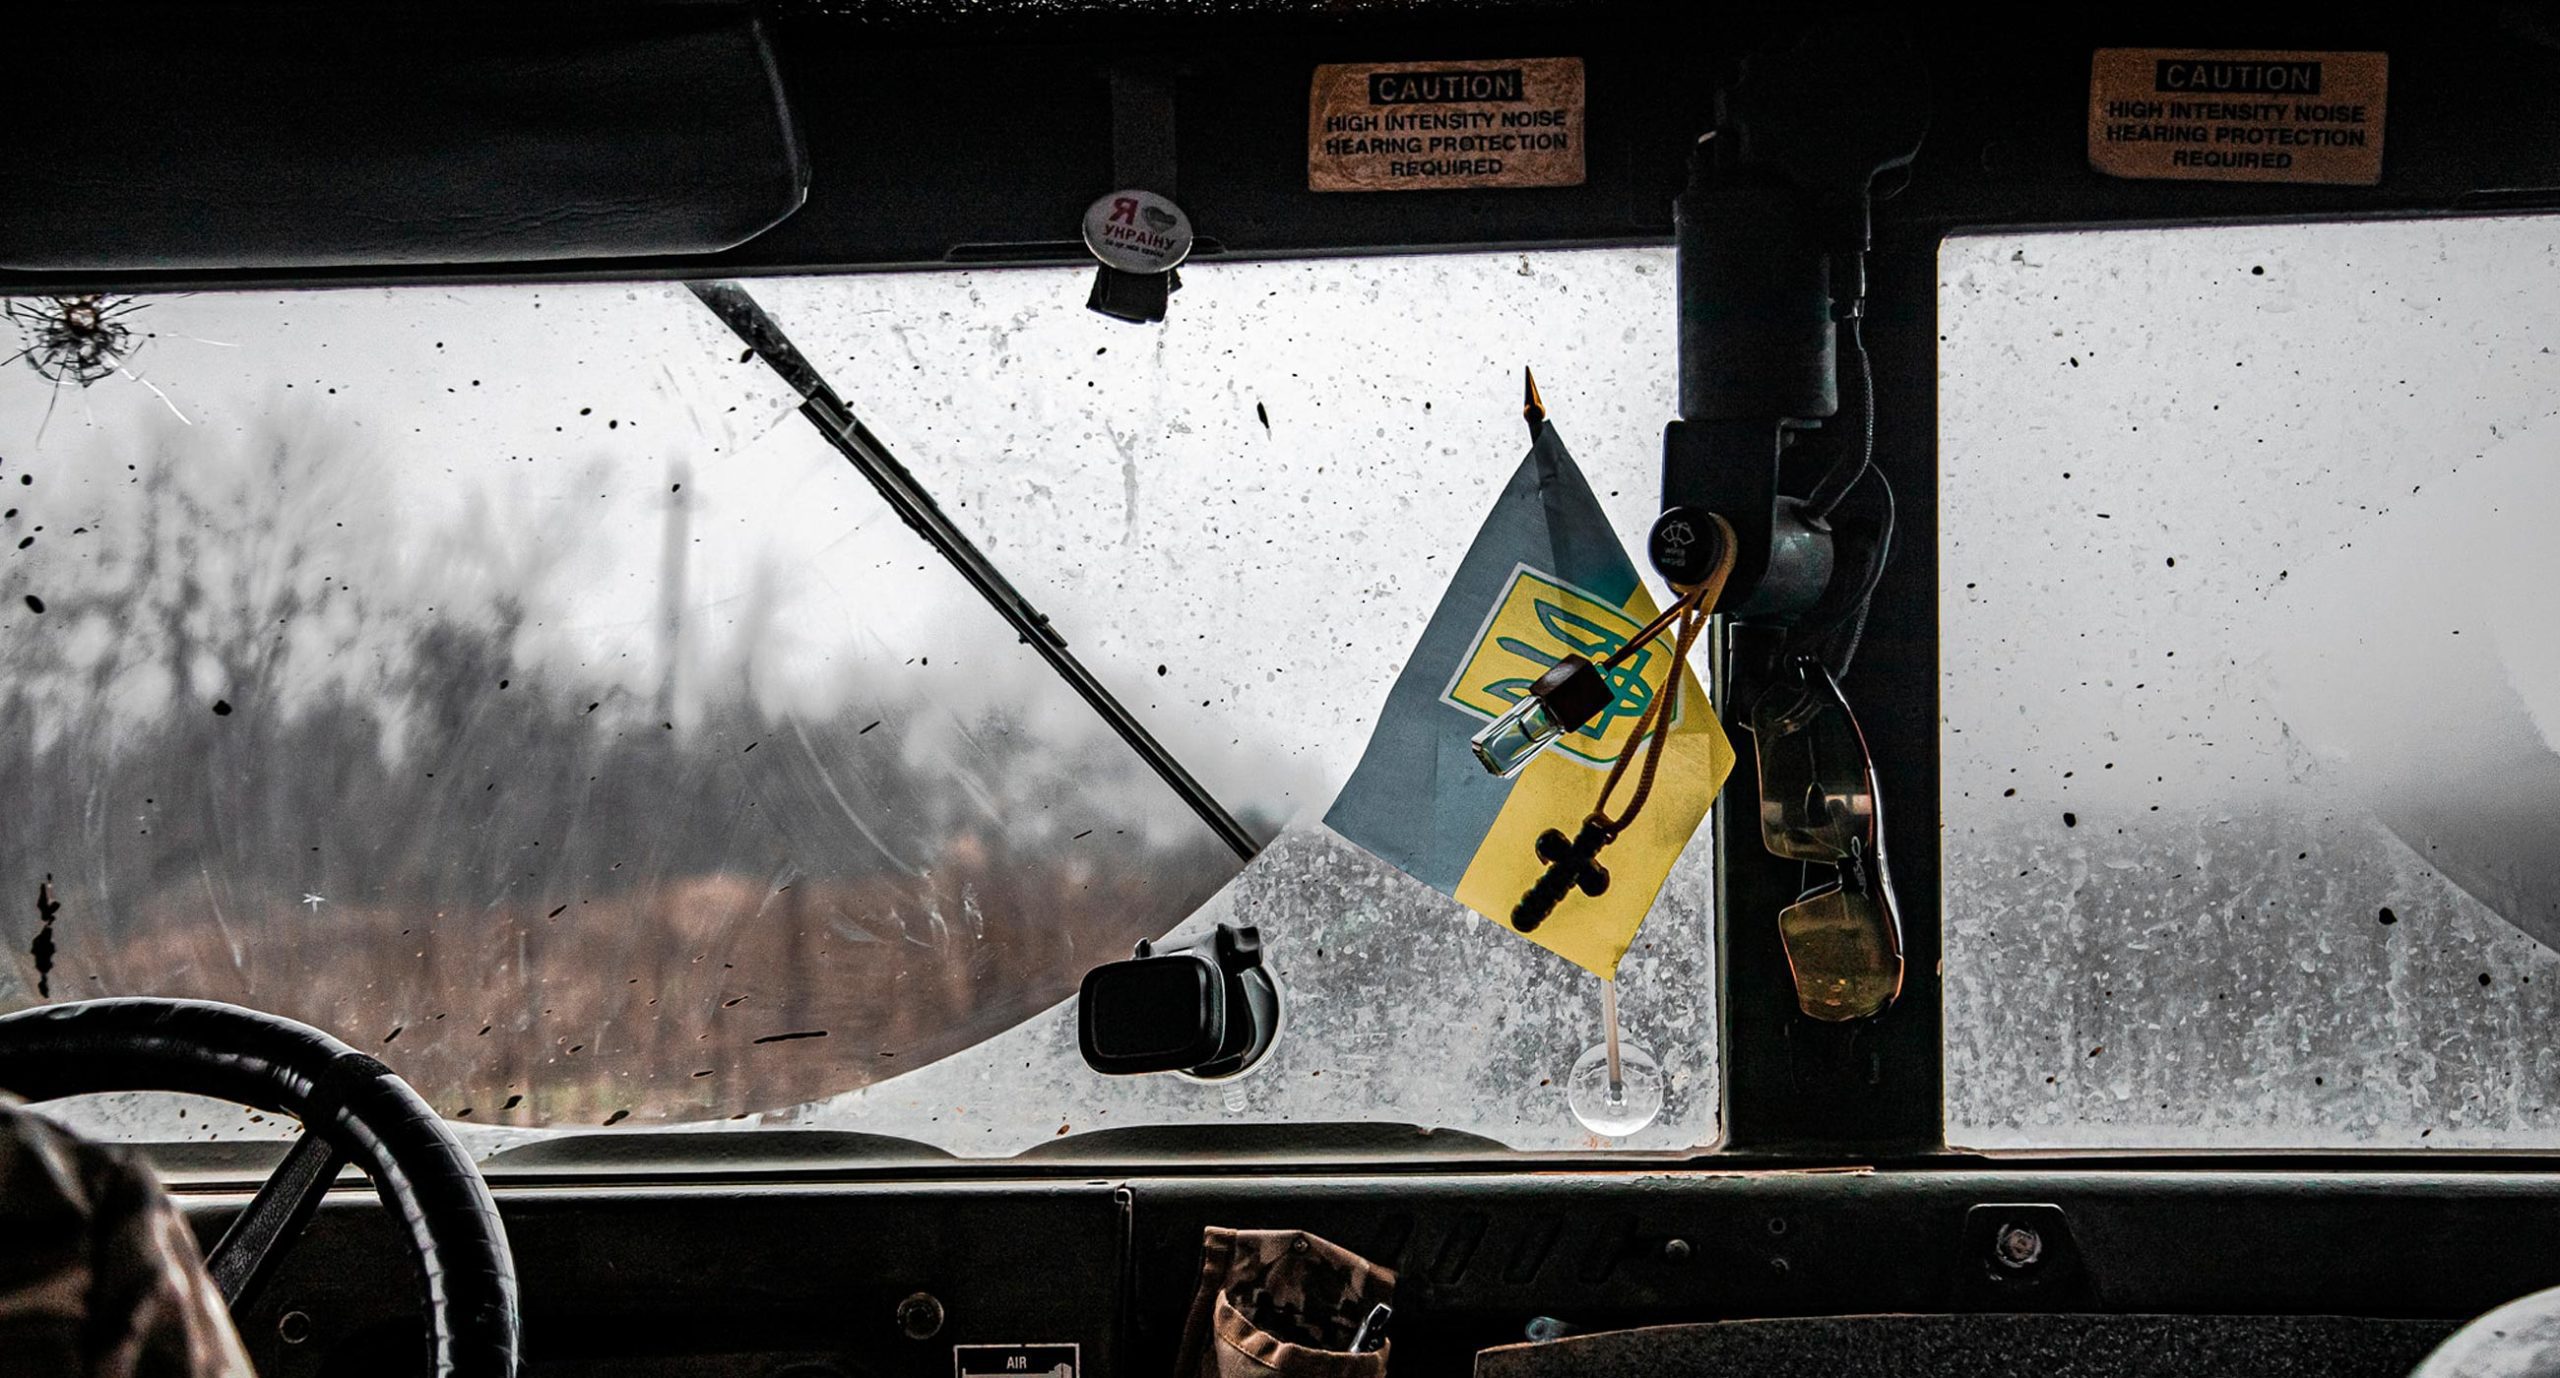 Russia Moves Military To Ukrainian Border. We Explain What’s Going On